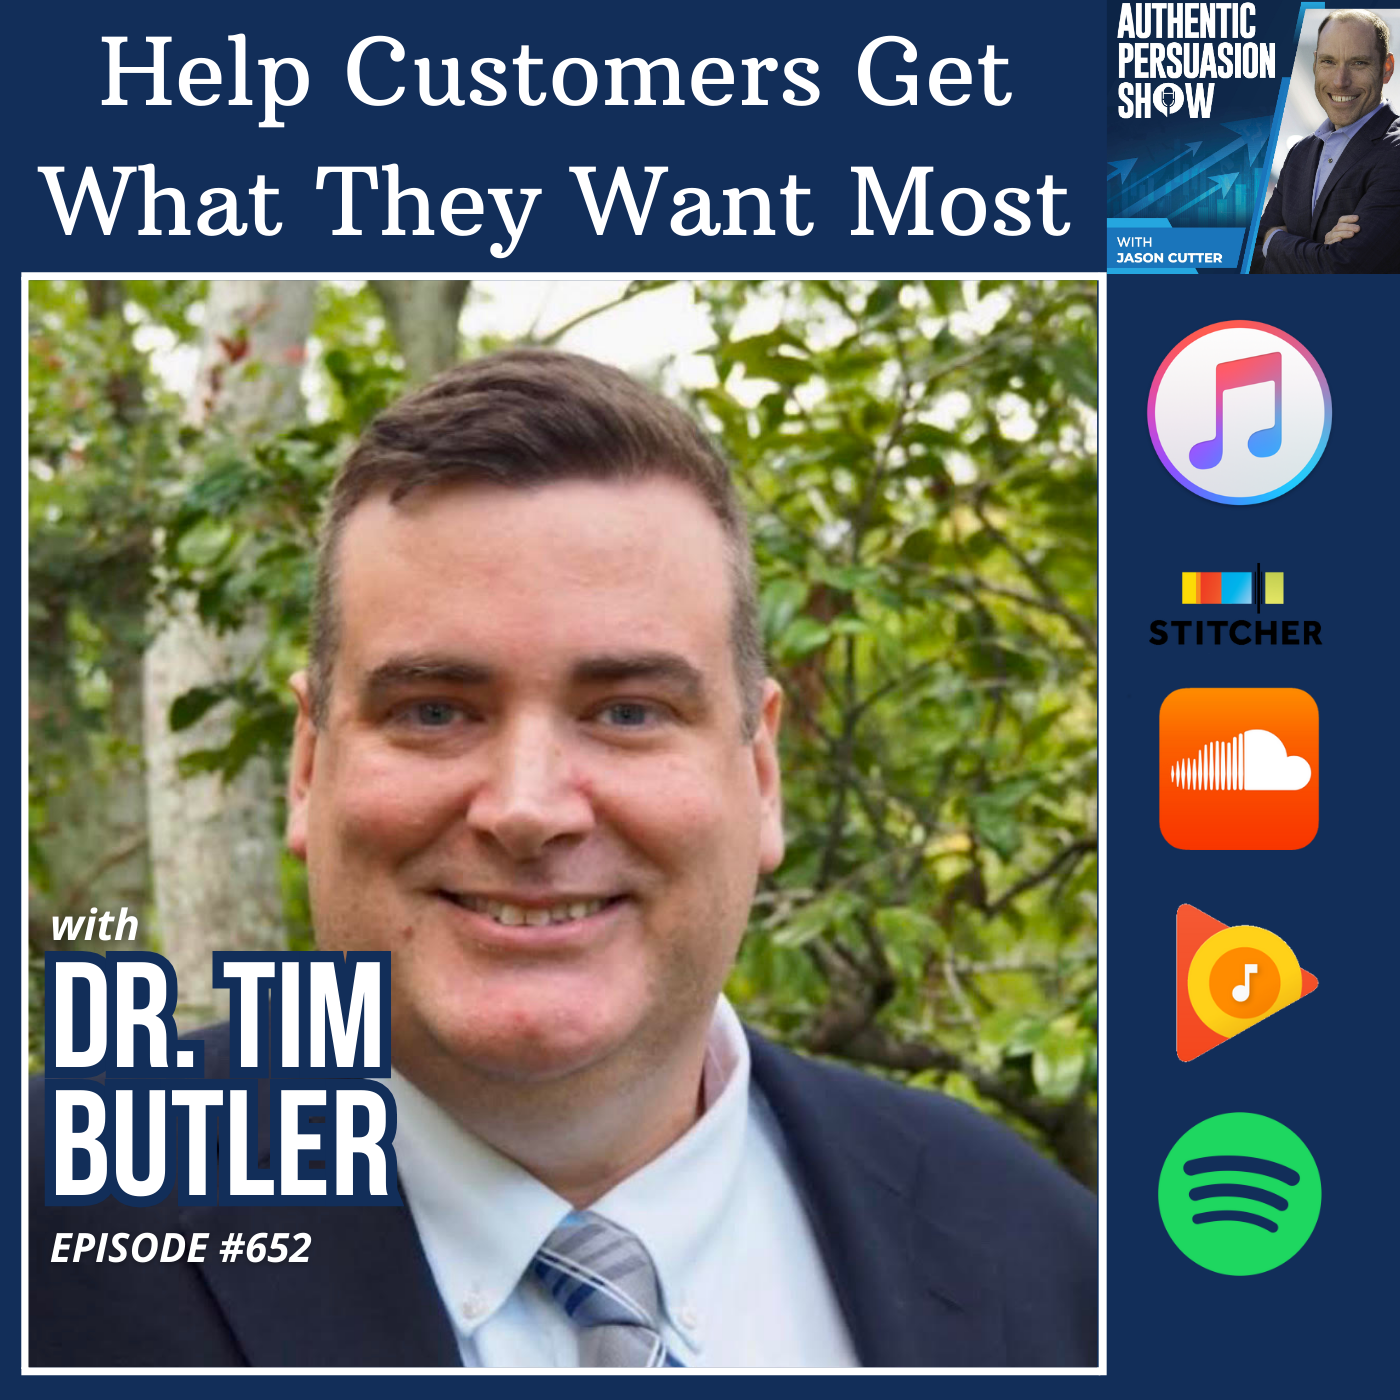 [652] Help Customers Get What They Want Most, with Dr. Tim Butler from Southeastern Louisiana University